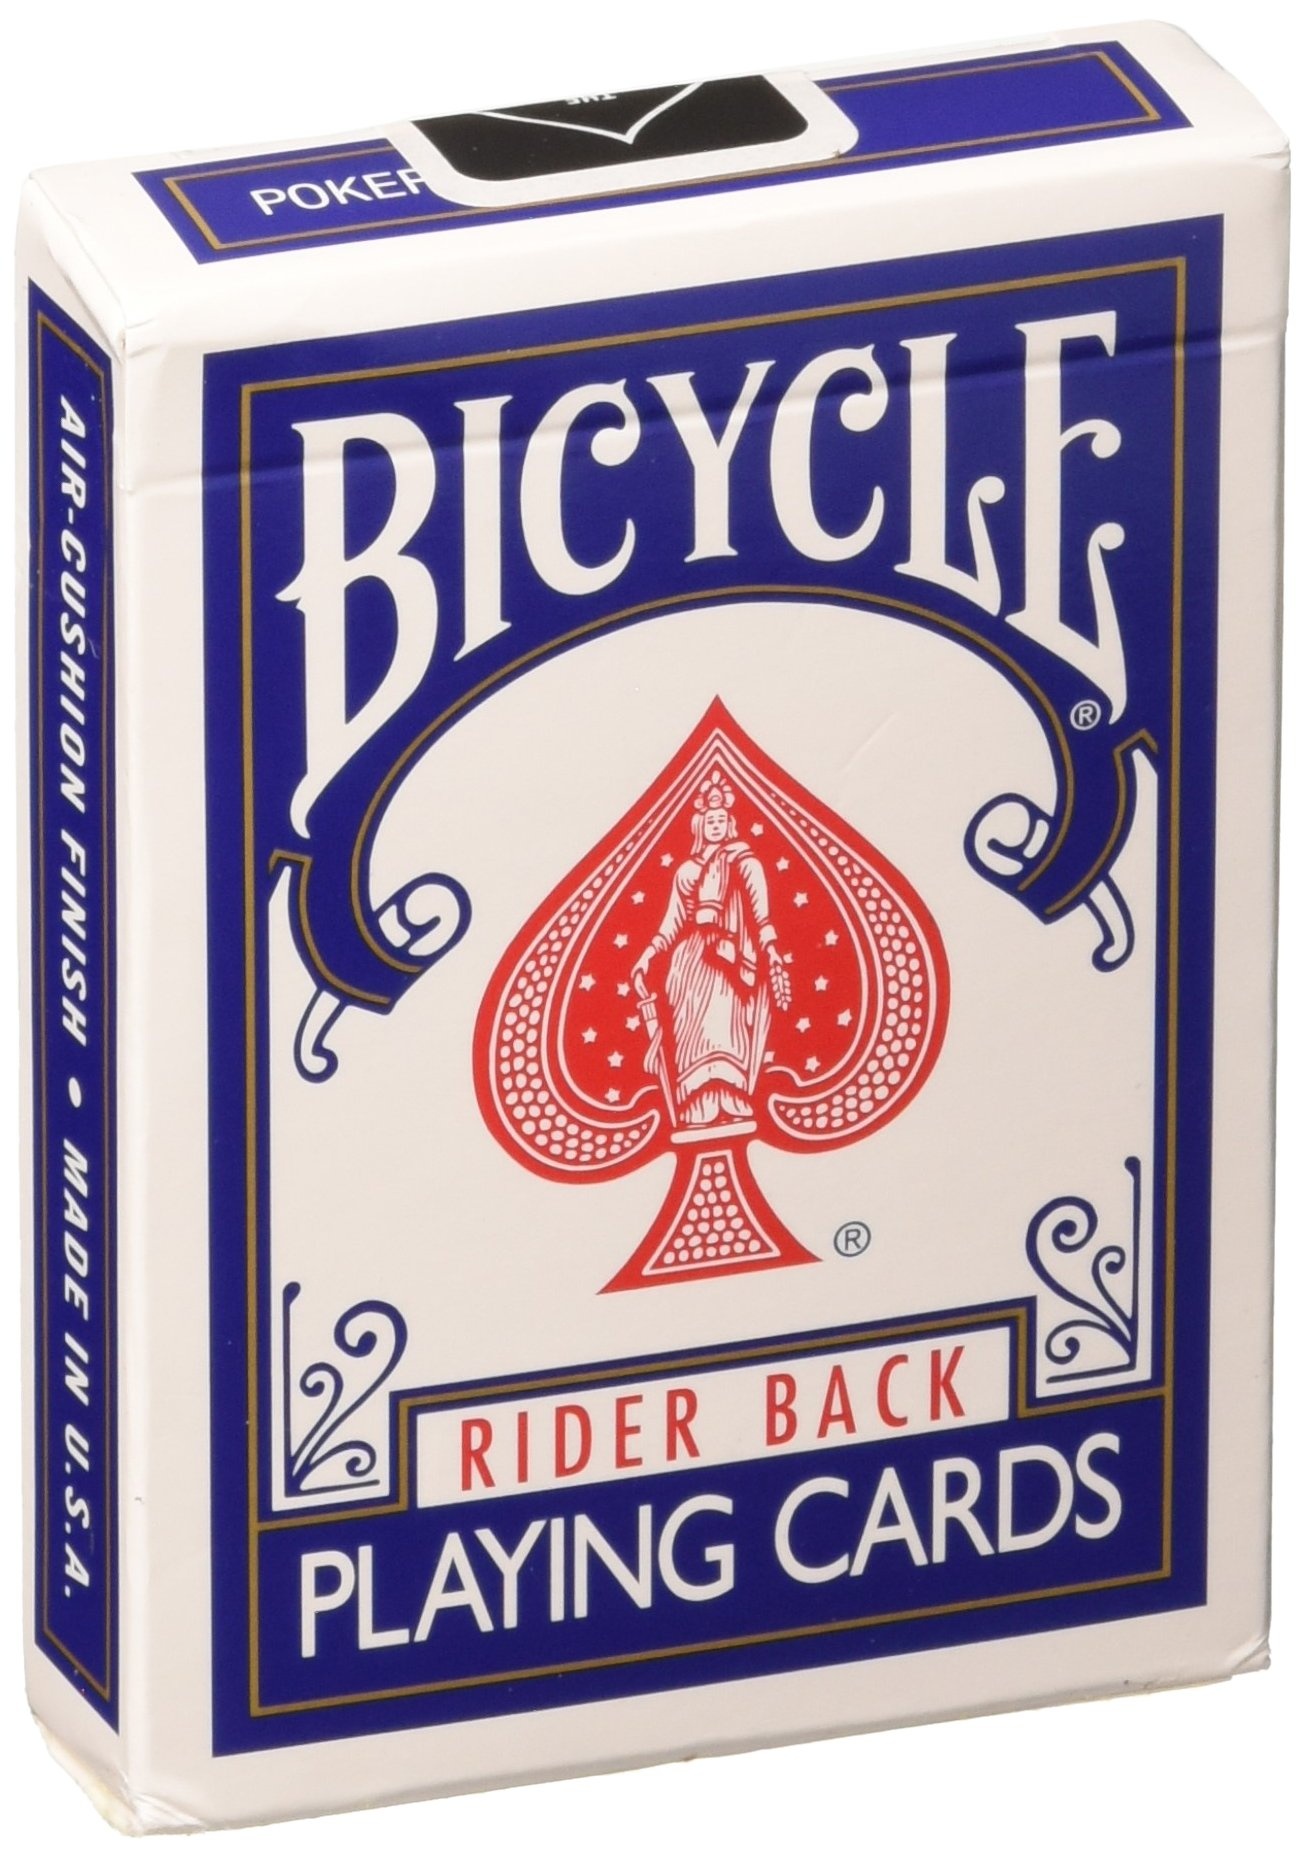 Bicycle Rider Back Playing Cards (Set of 2 Decks: Red & Blue) by Unknown